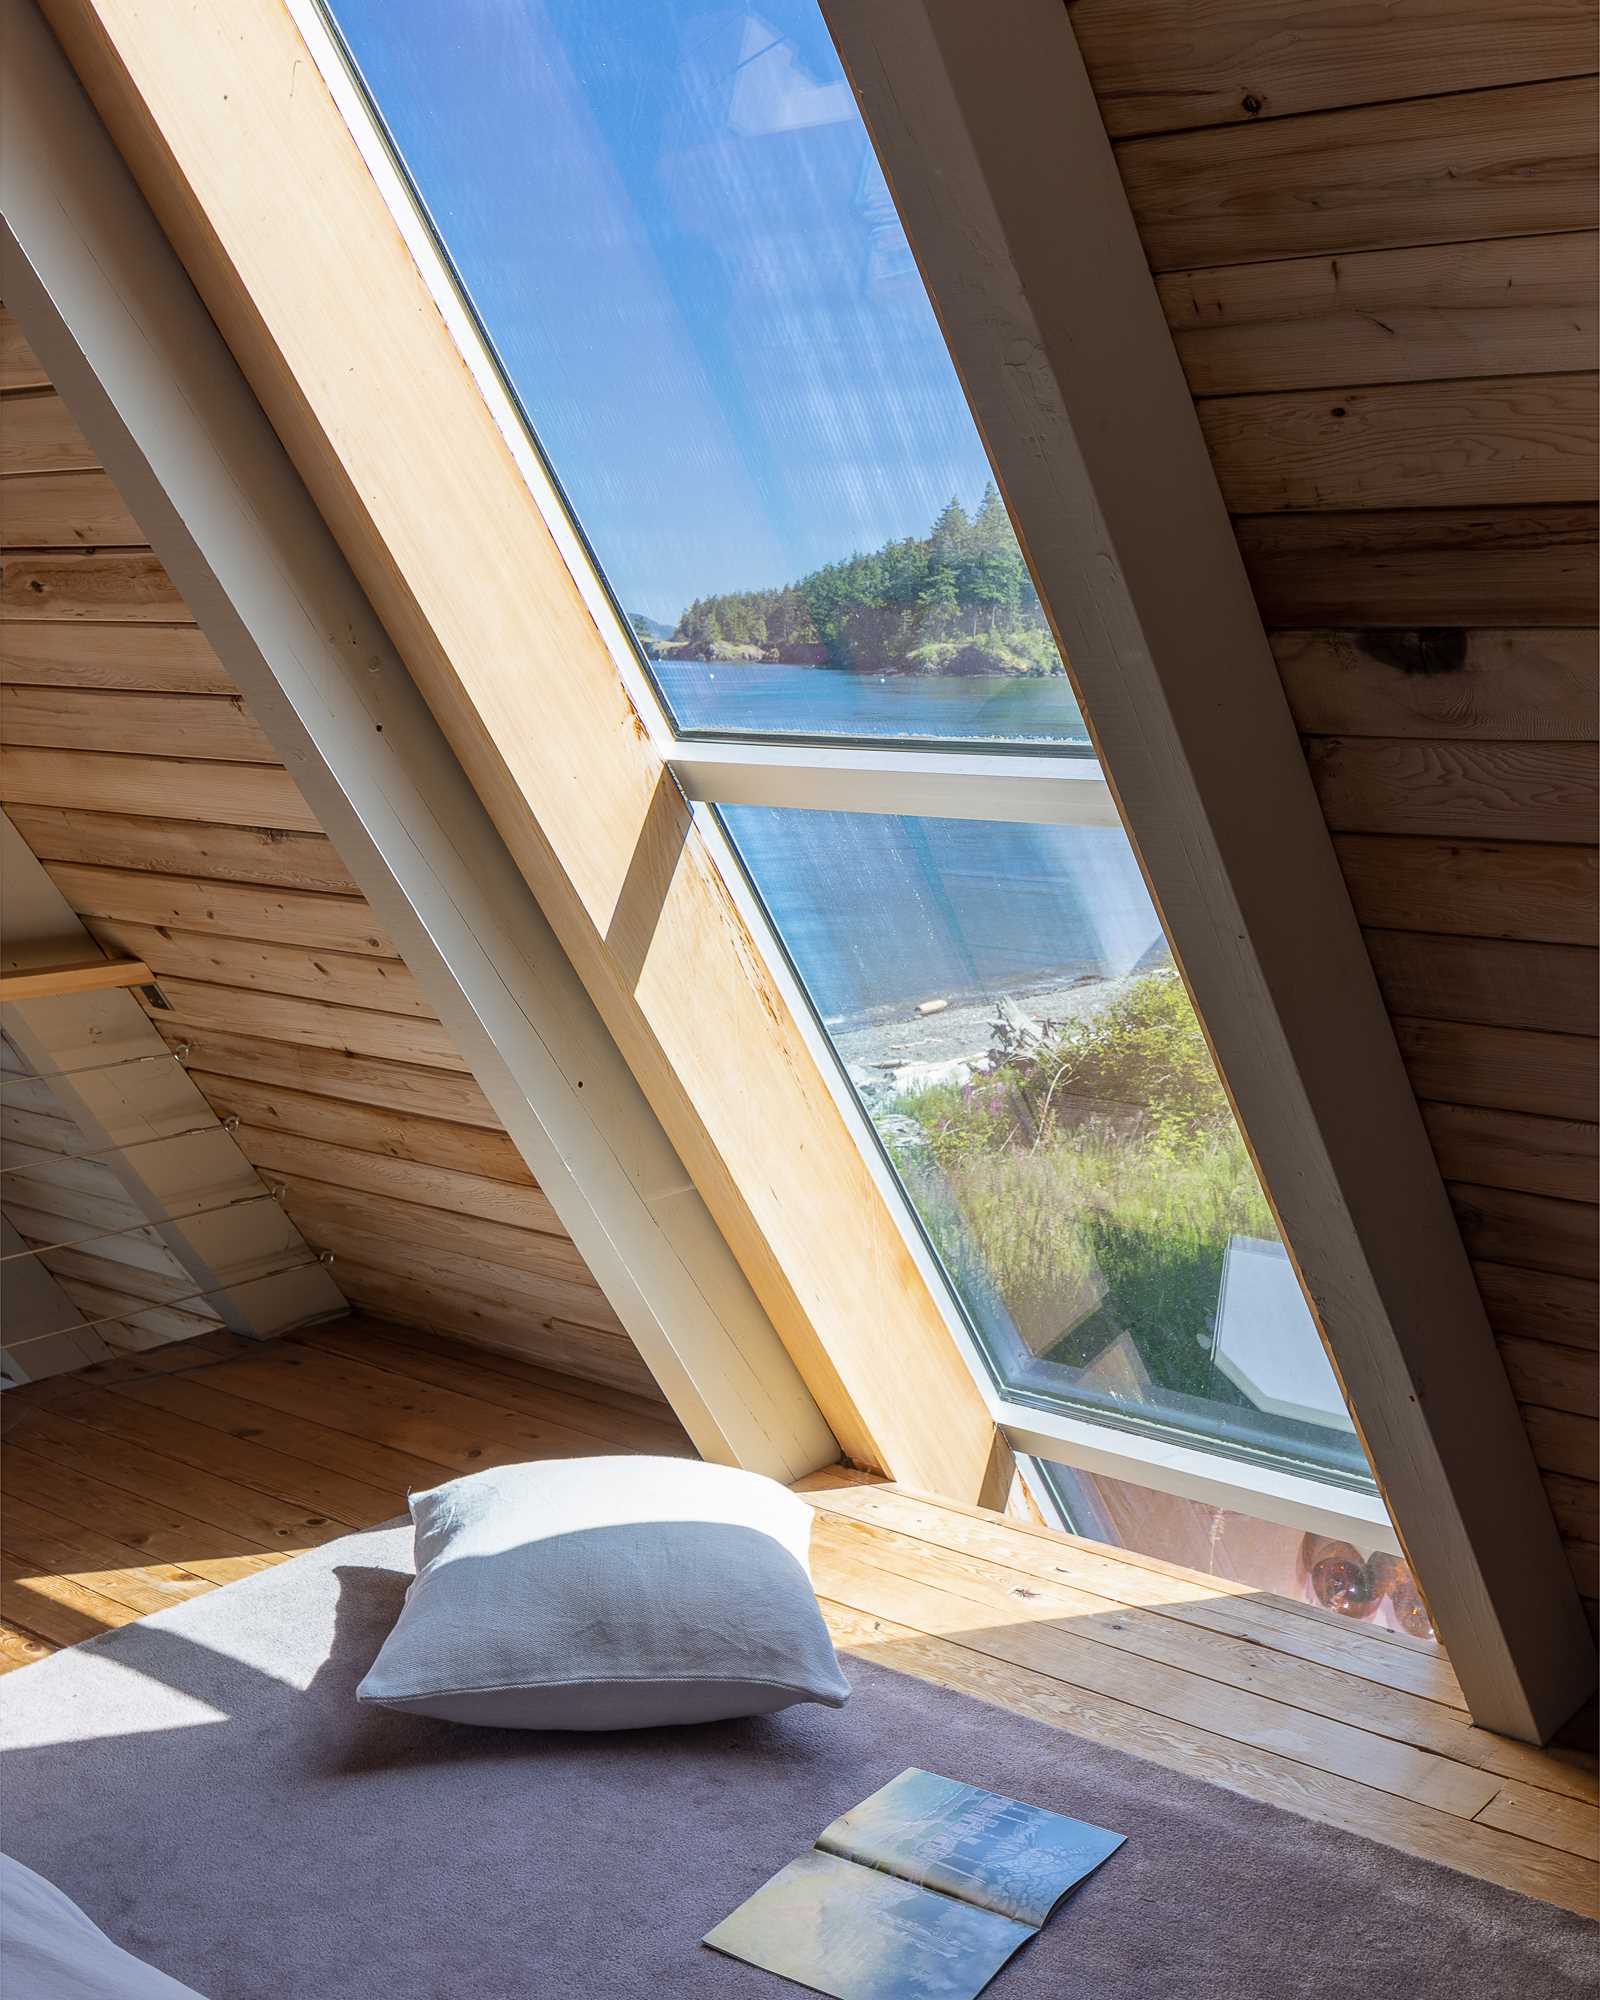 This bedroom in an A-Frame home includes a freestanding bed as well as built-in beds.